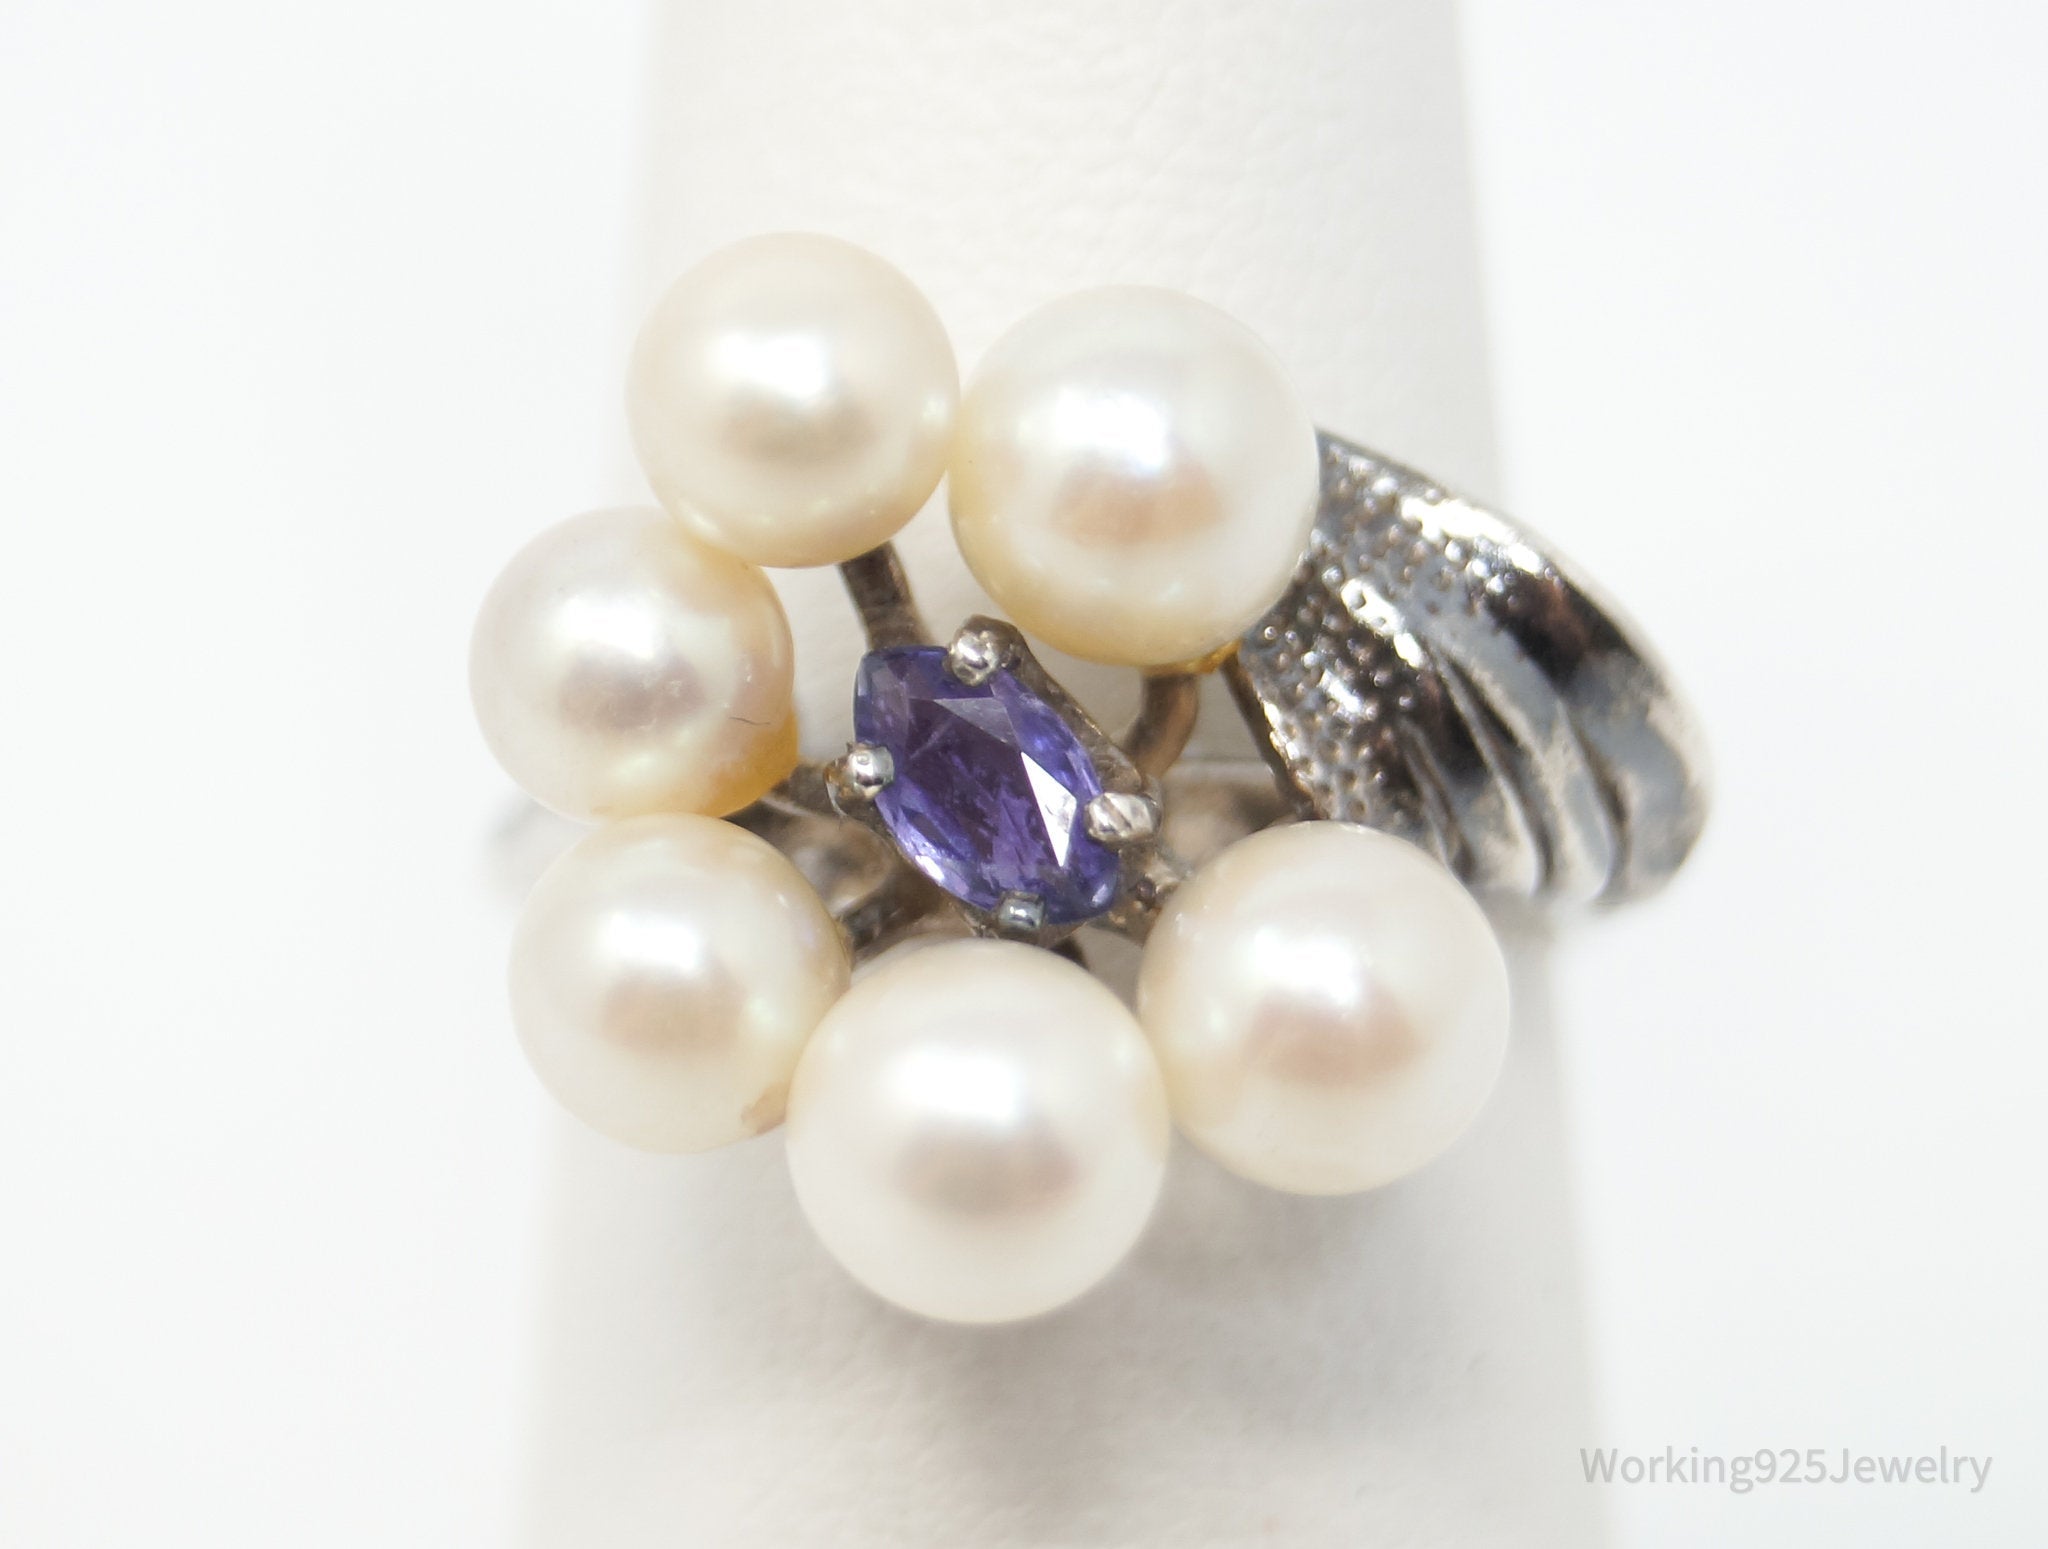 Antique Amethyst Pearl Sterling Silver Ring - Sz 6.25